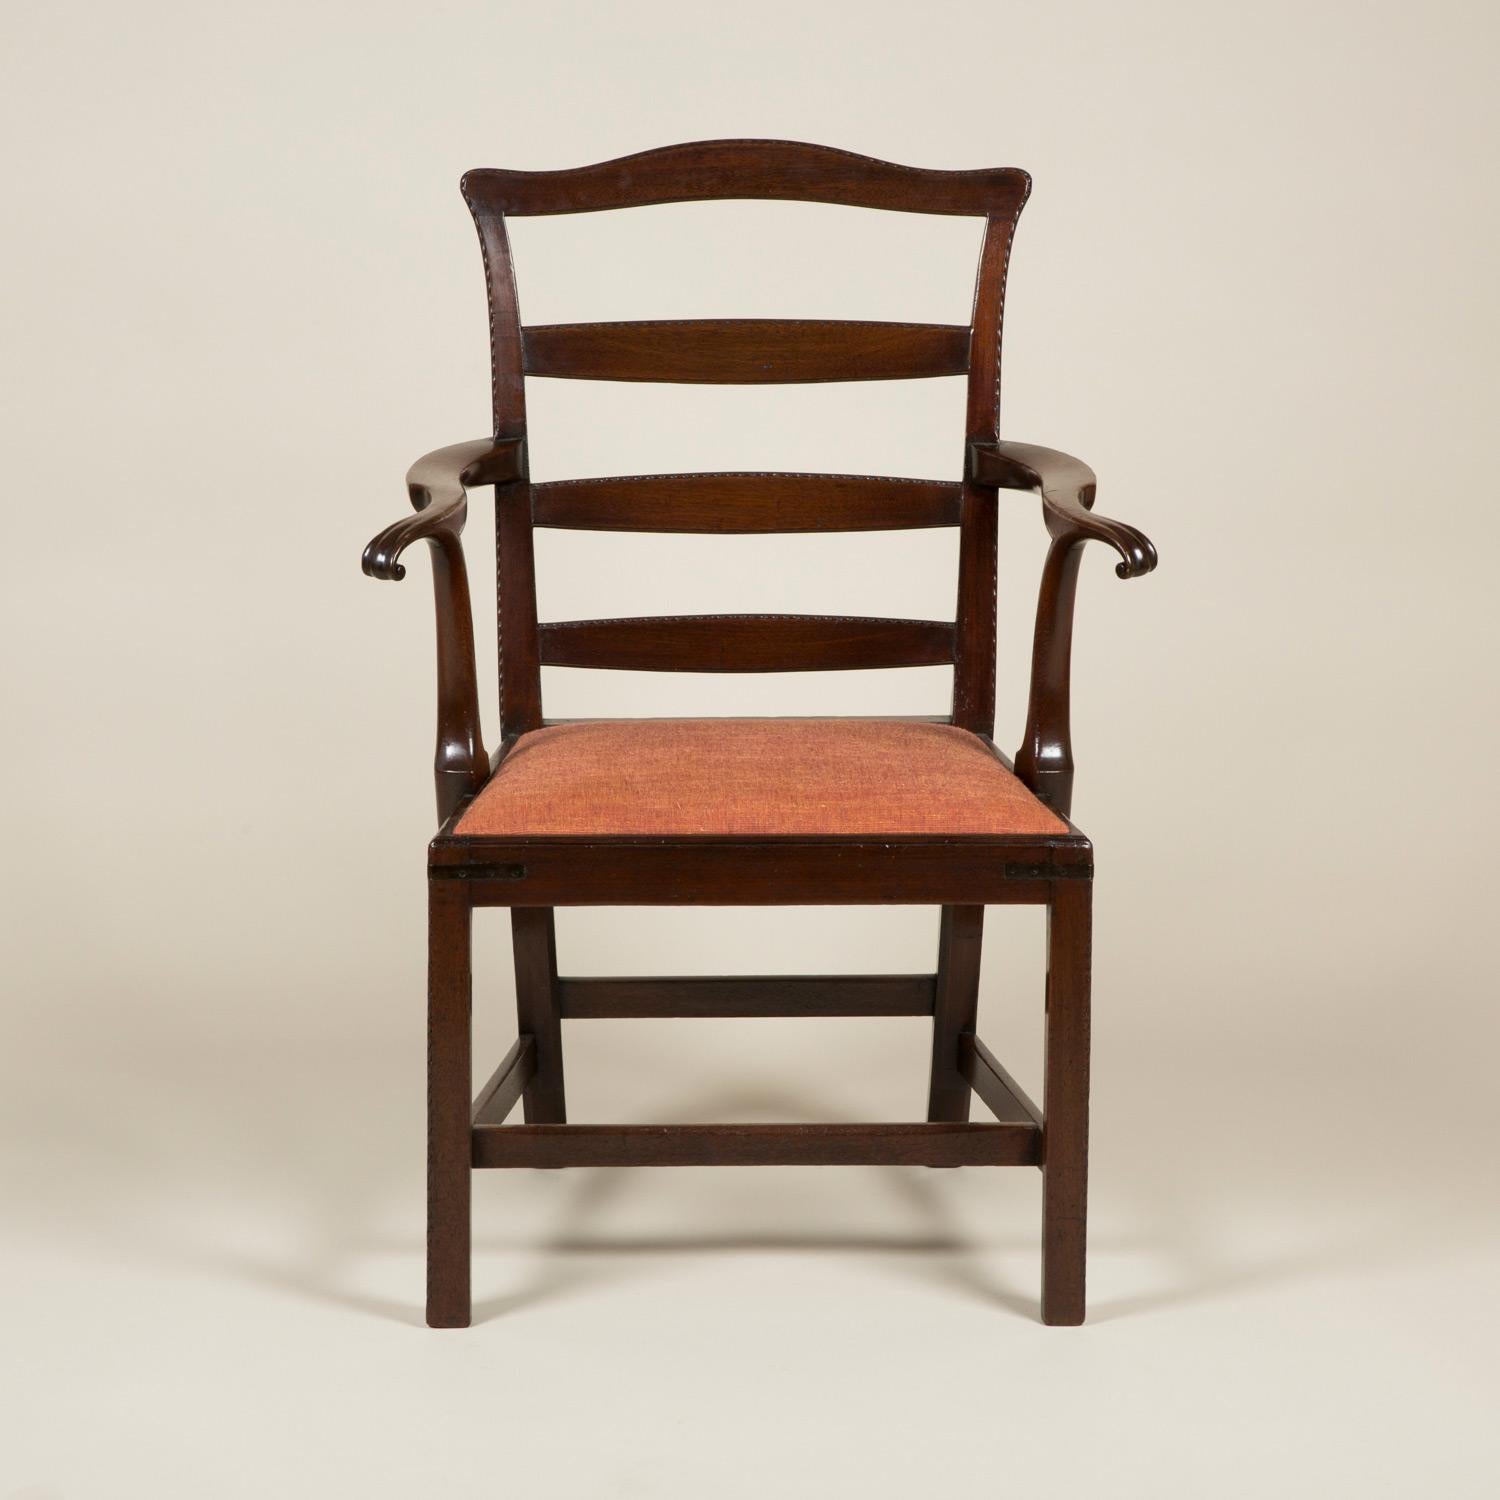 A George III mahogany ladder-back elbow chair with rope twist edges to the back and out-turned arms.